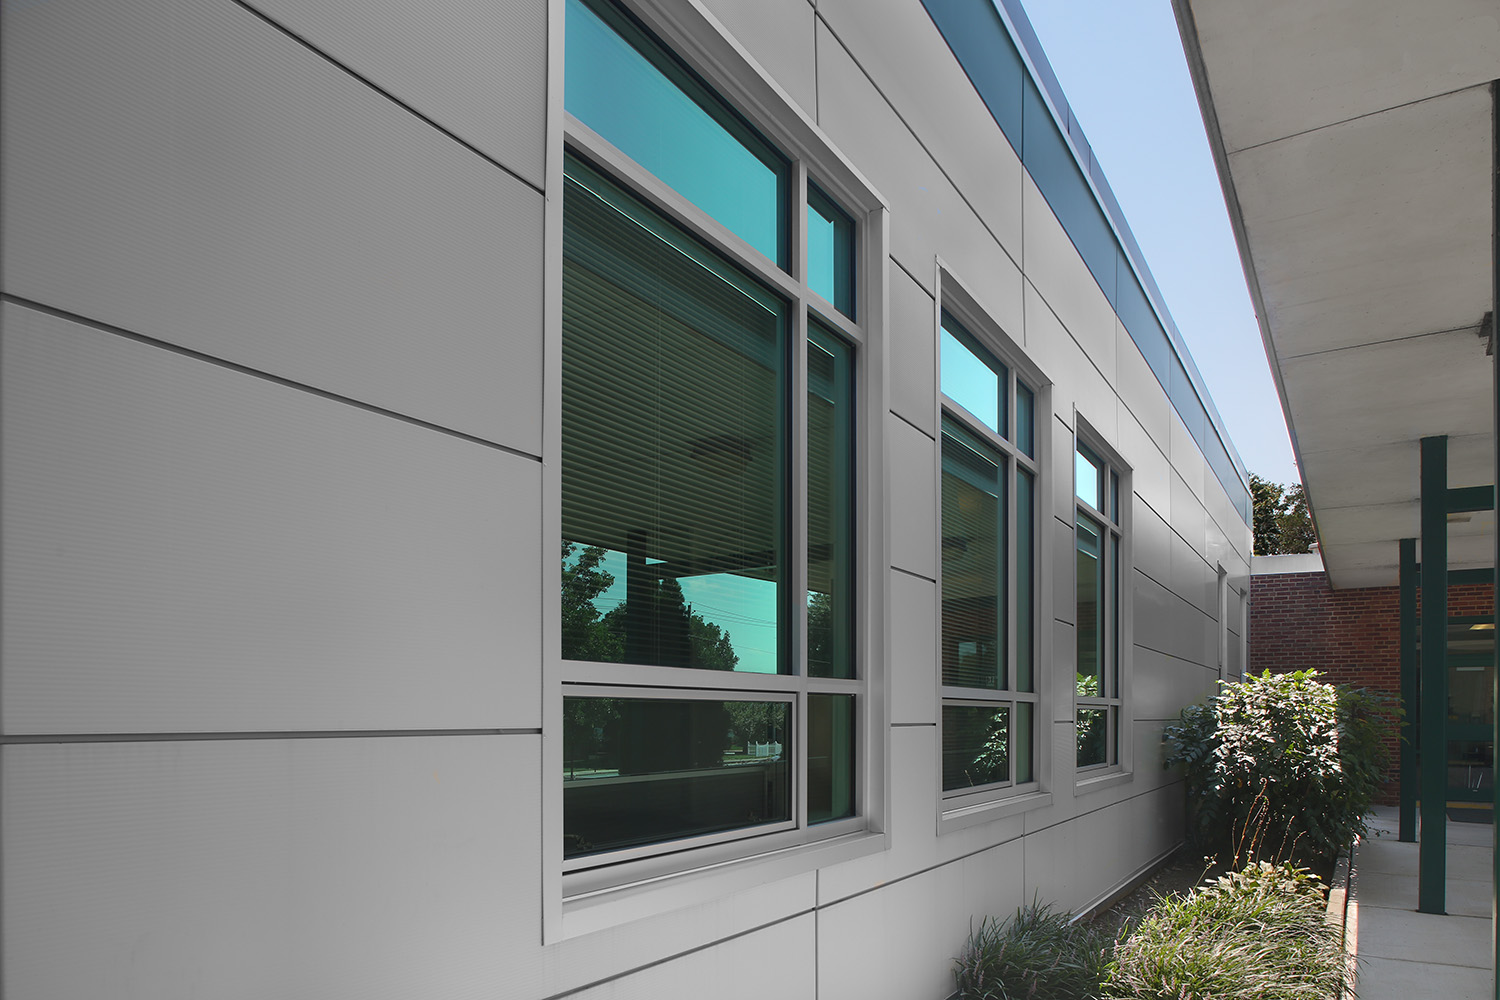  Aluminum Composite Material (ACM), are flat panels consisting of two thin coil-coated  aluminum  sheets bonded to a non- aluminium &nbsp;core. ACM Panels are frequently used for external cladding or facades of buildings, insulation, and signage. 